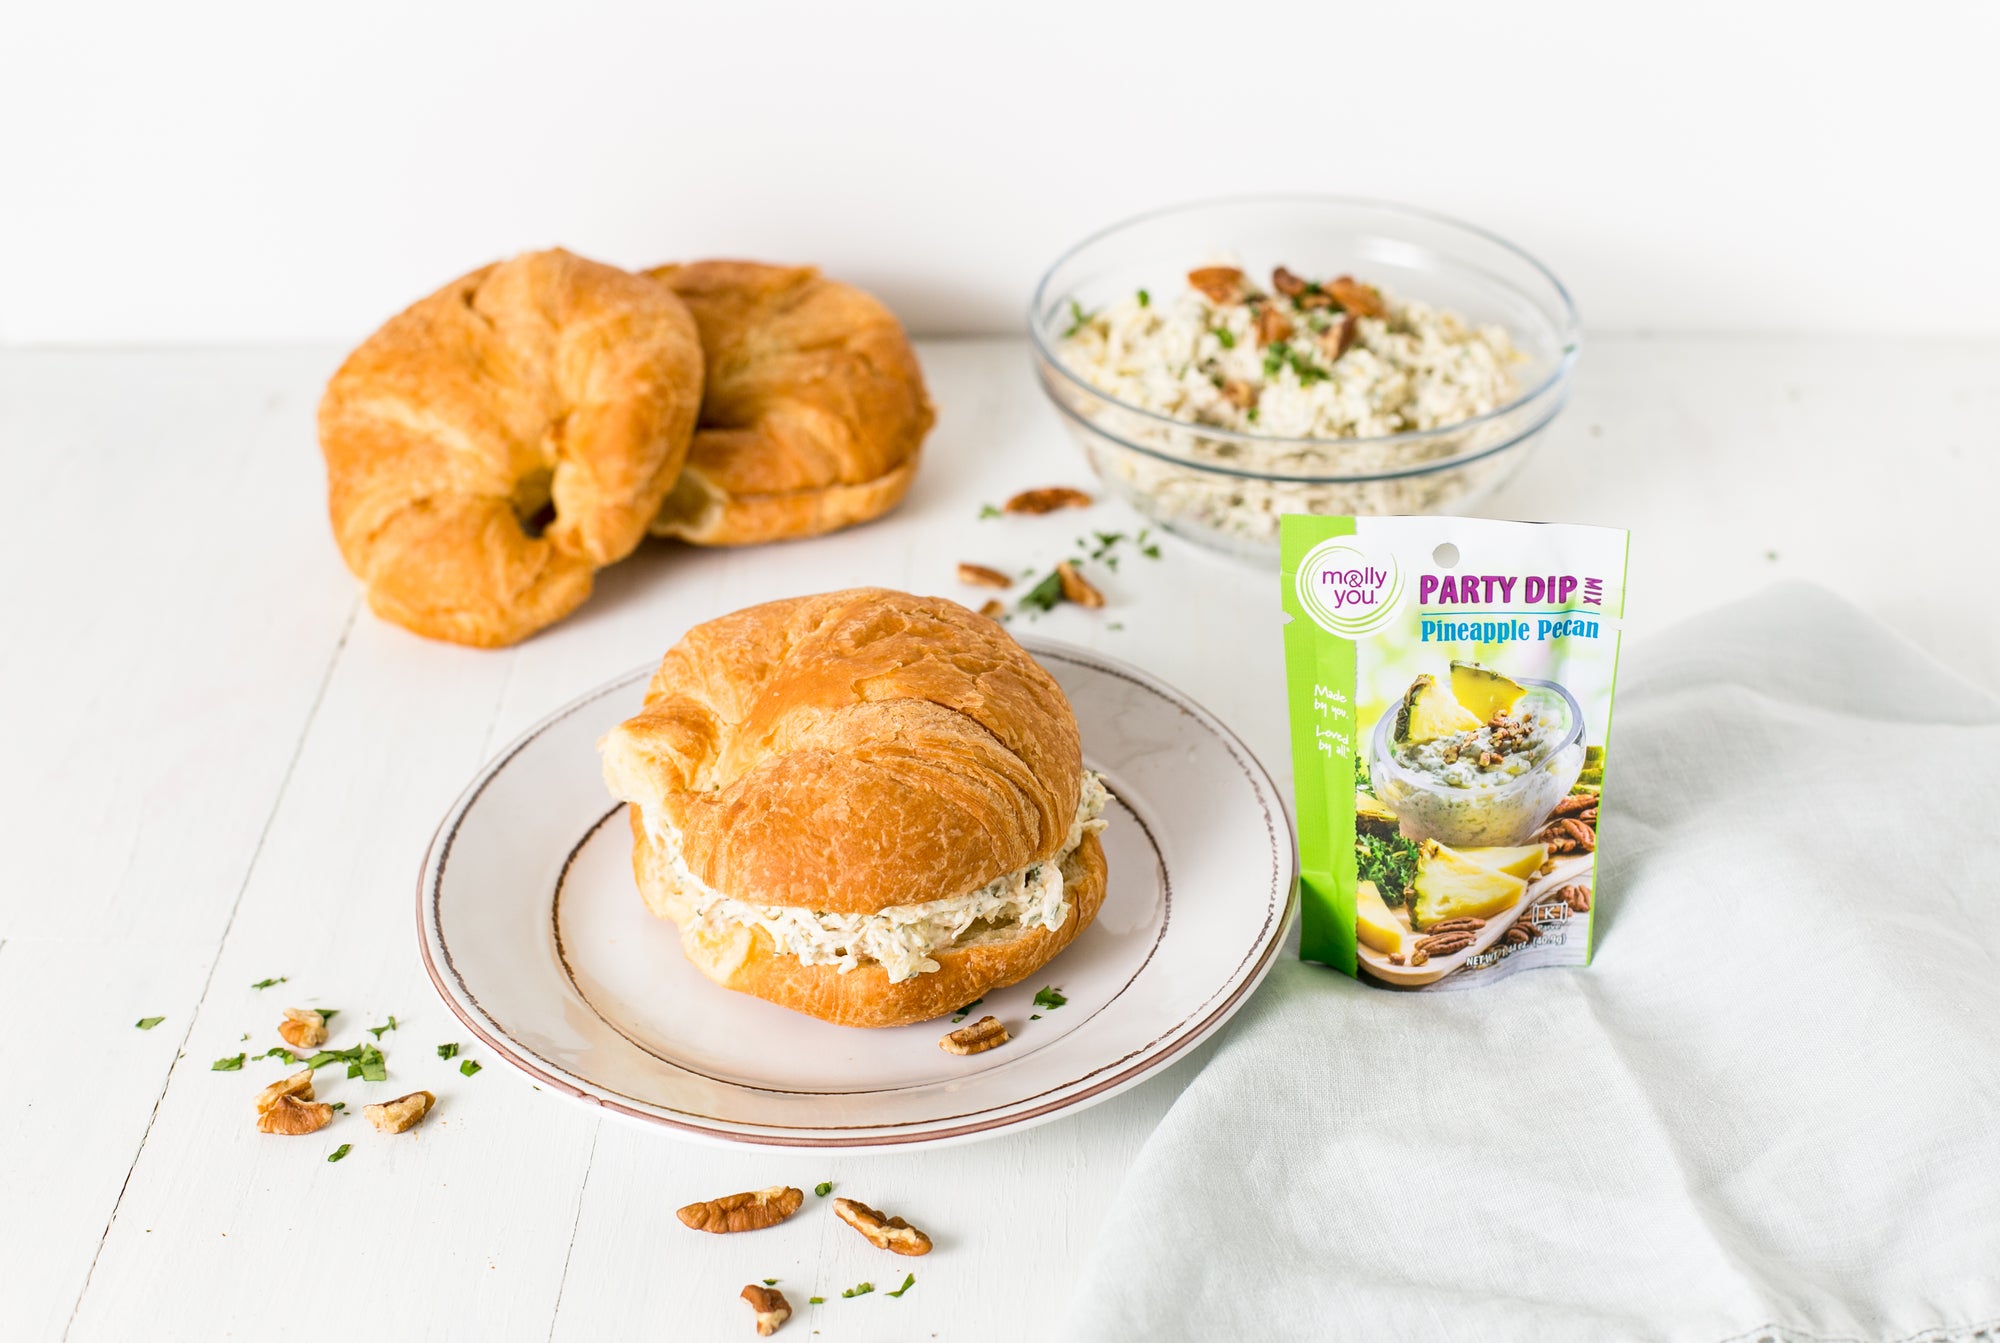 Pineapple Pecan Chicken Salad made with molly&you Pineapple Pecan Party Dip Mix